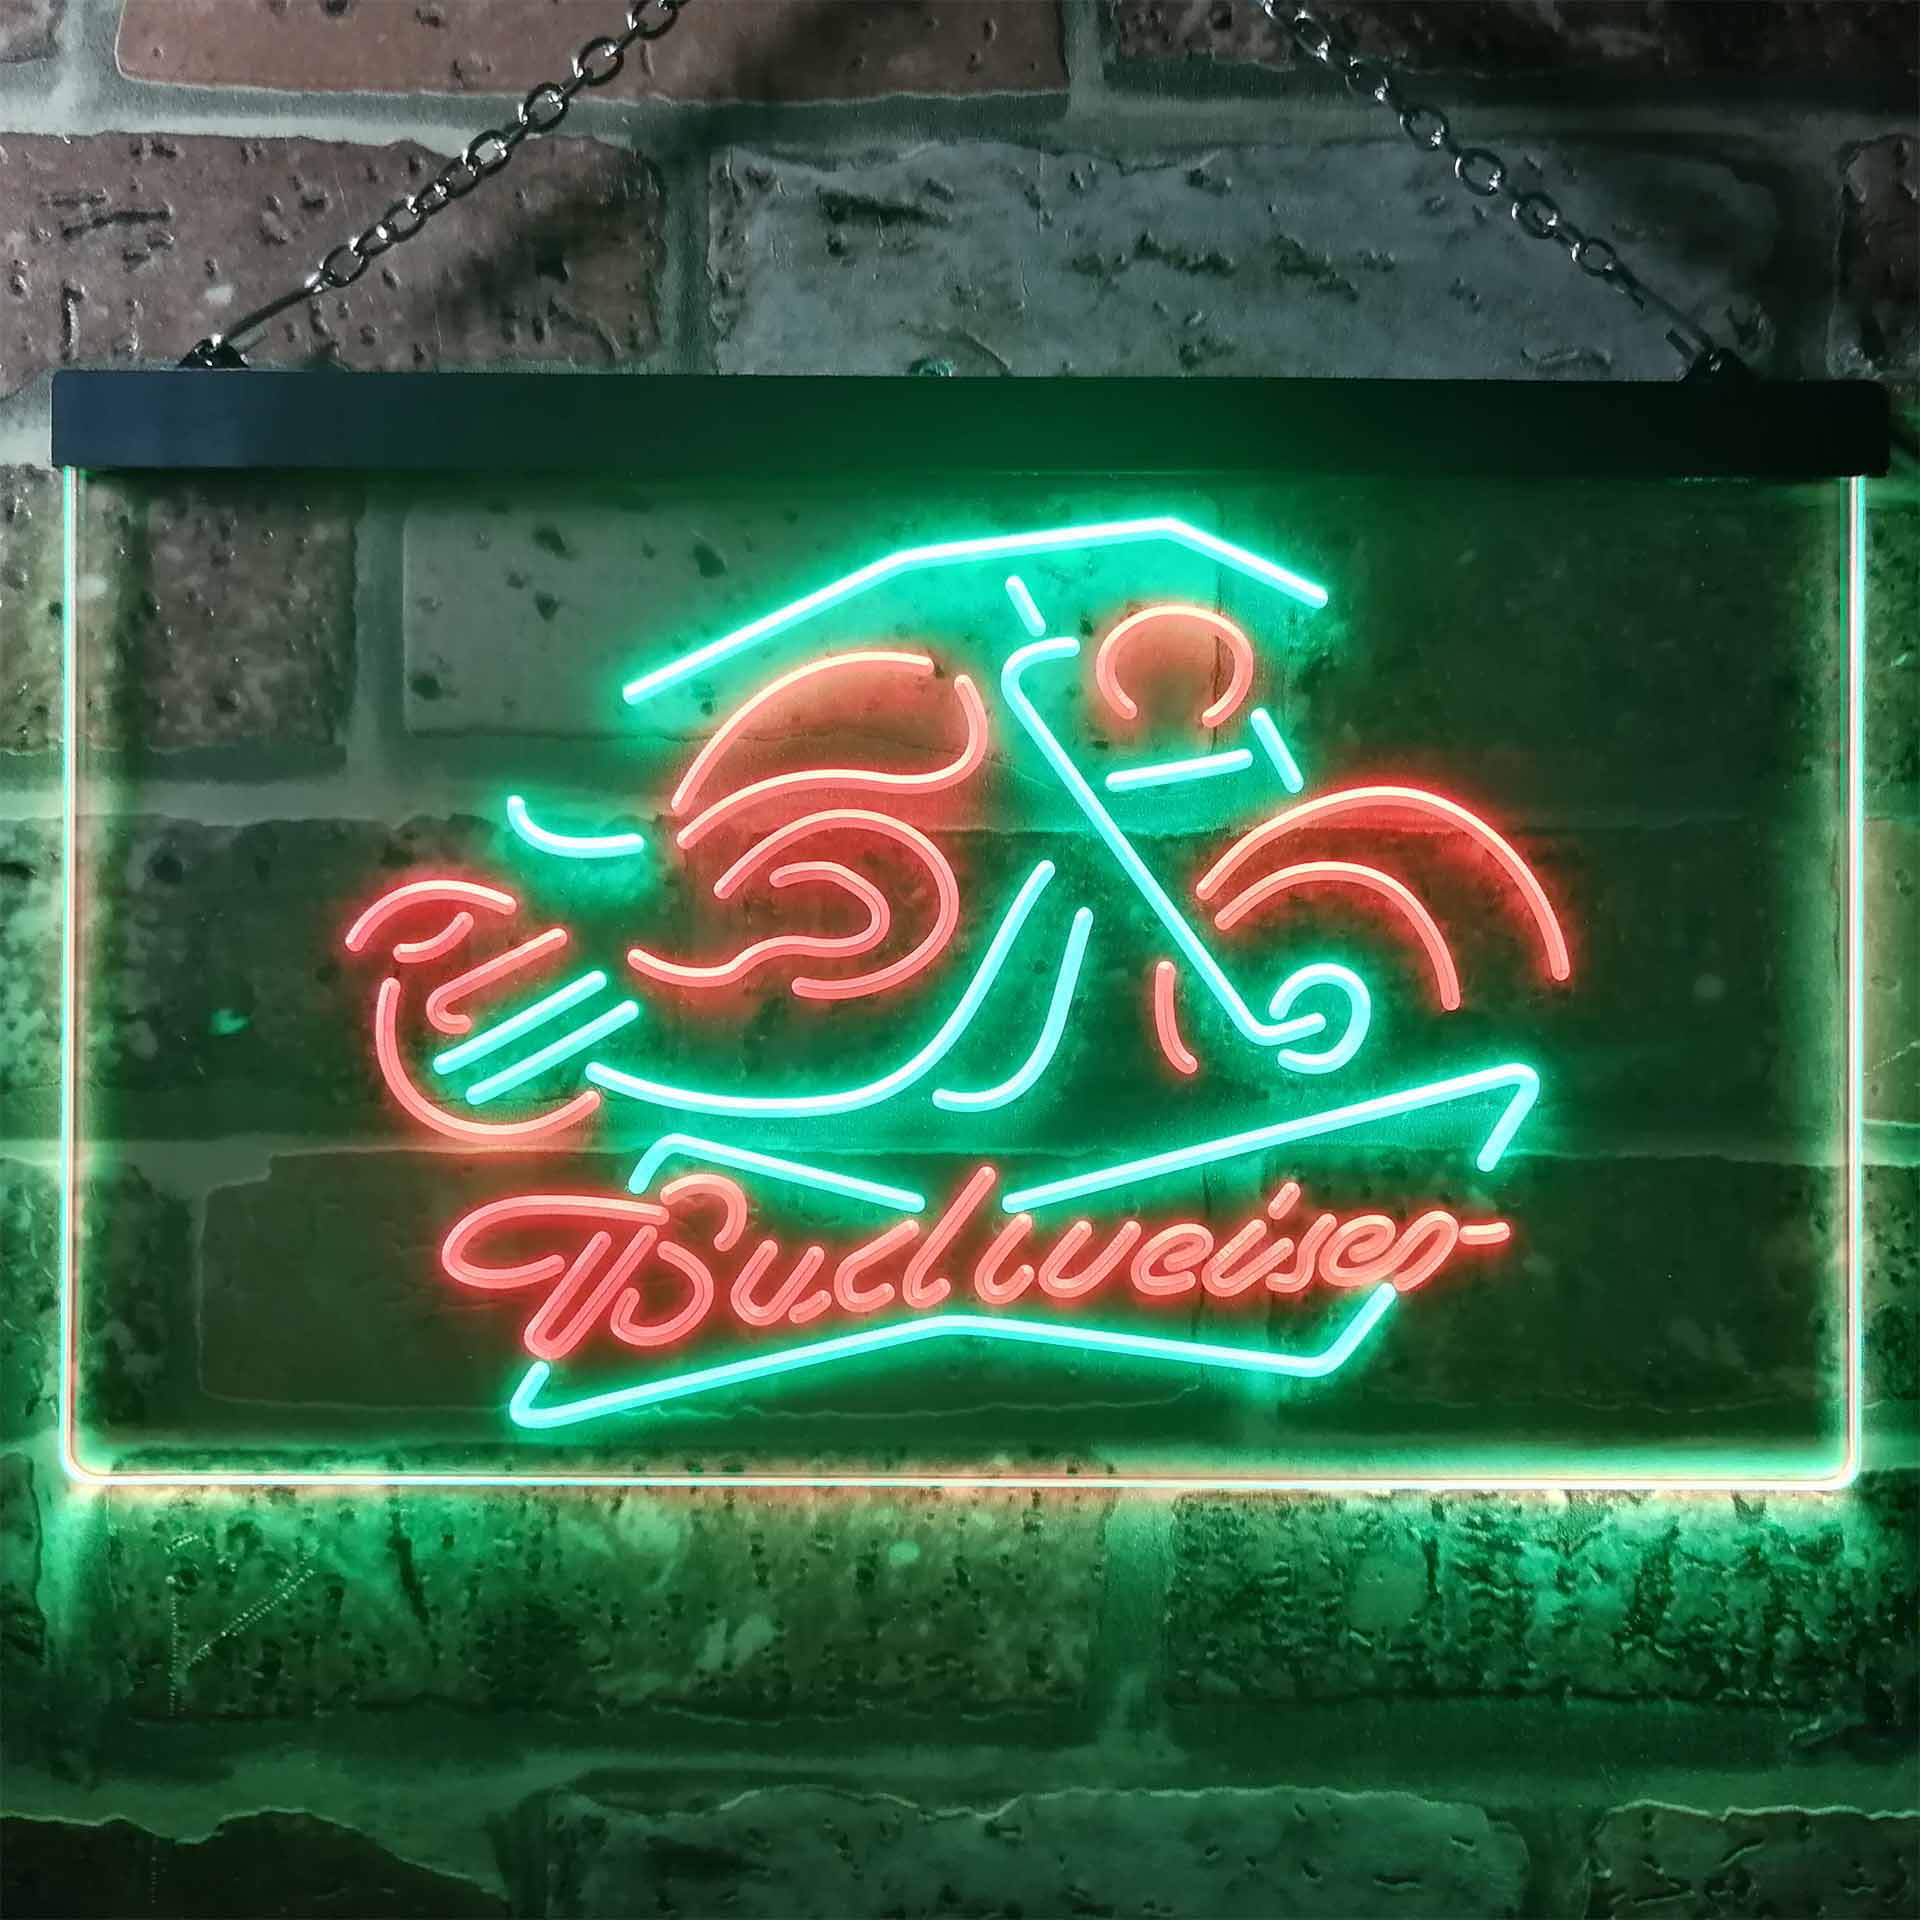 Budweiser Beer Motorcycle Neon Sign - LED LAB CAVE